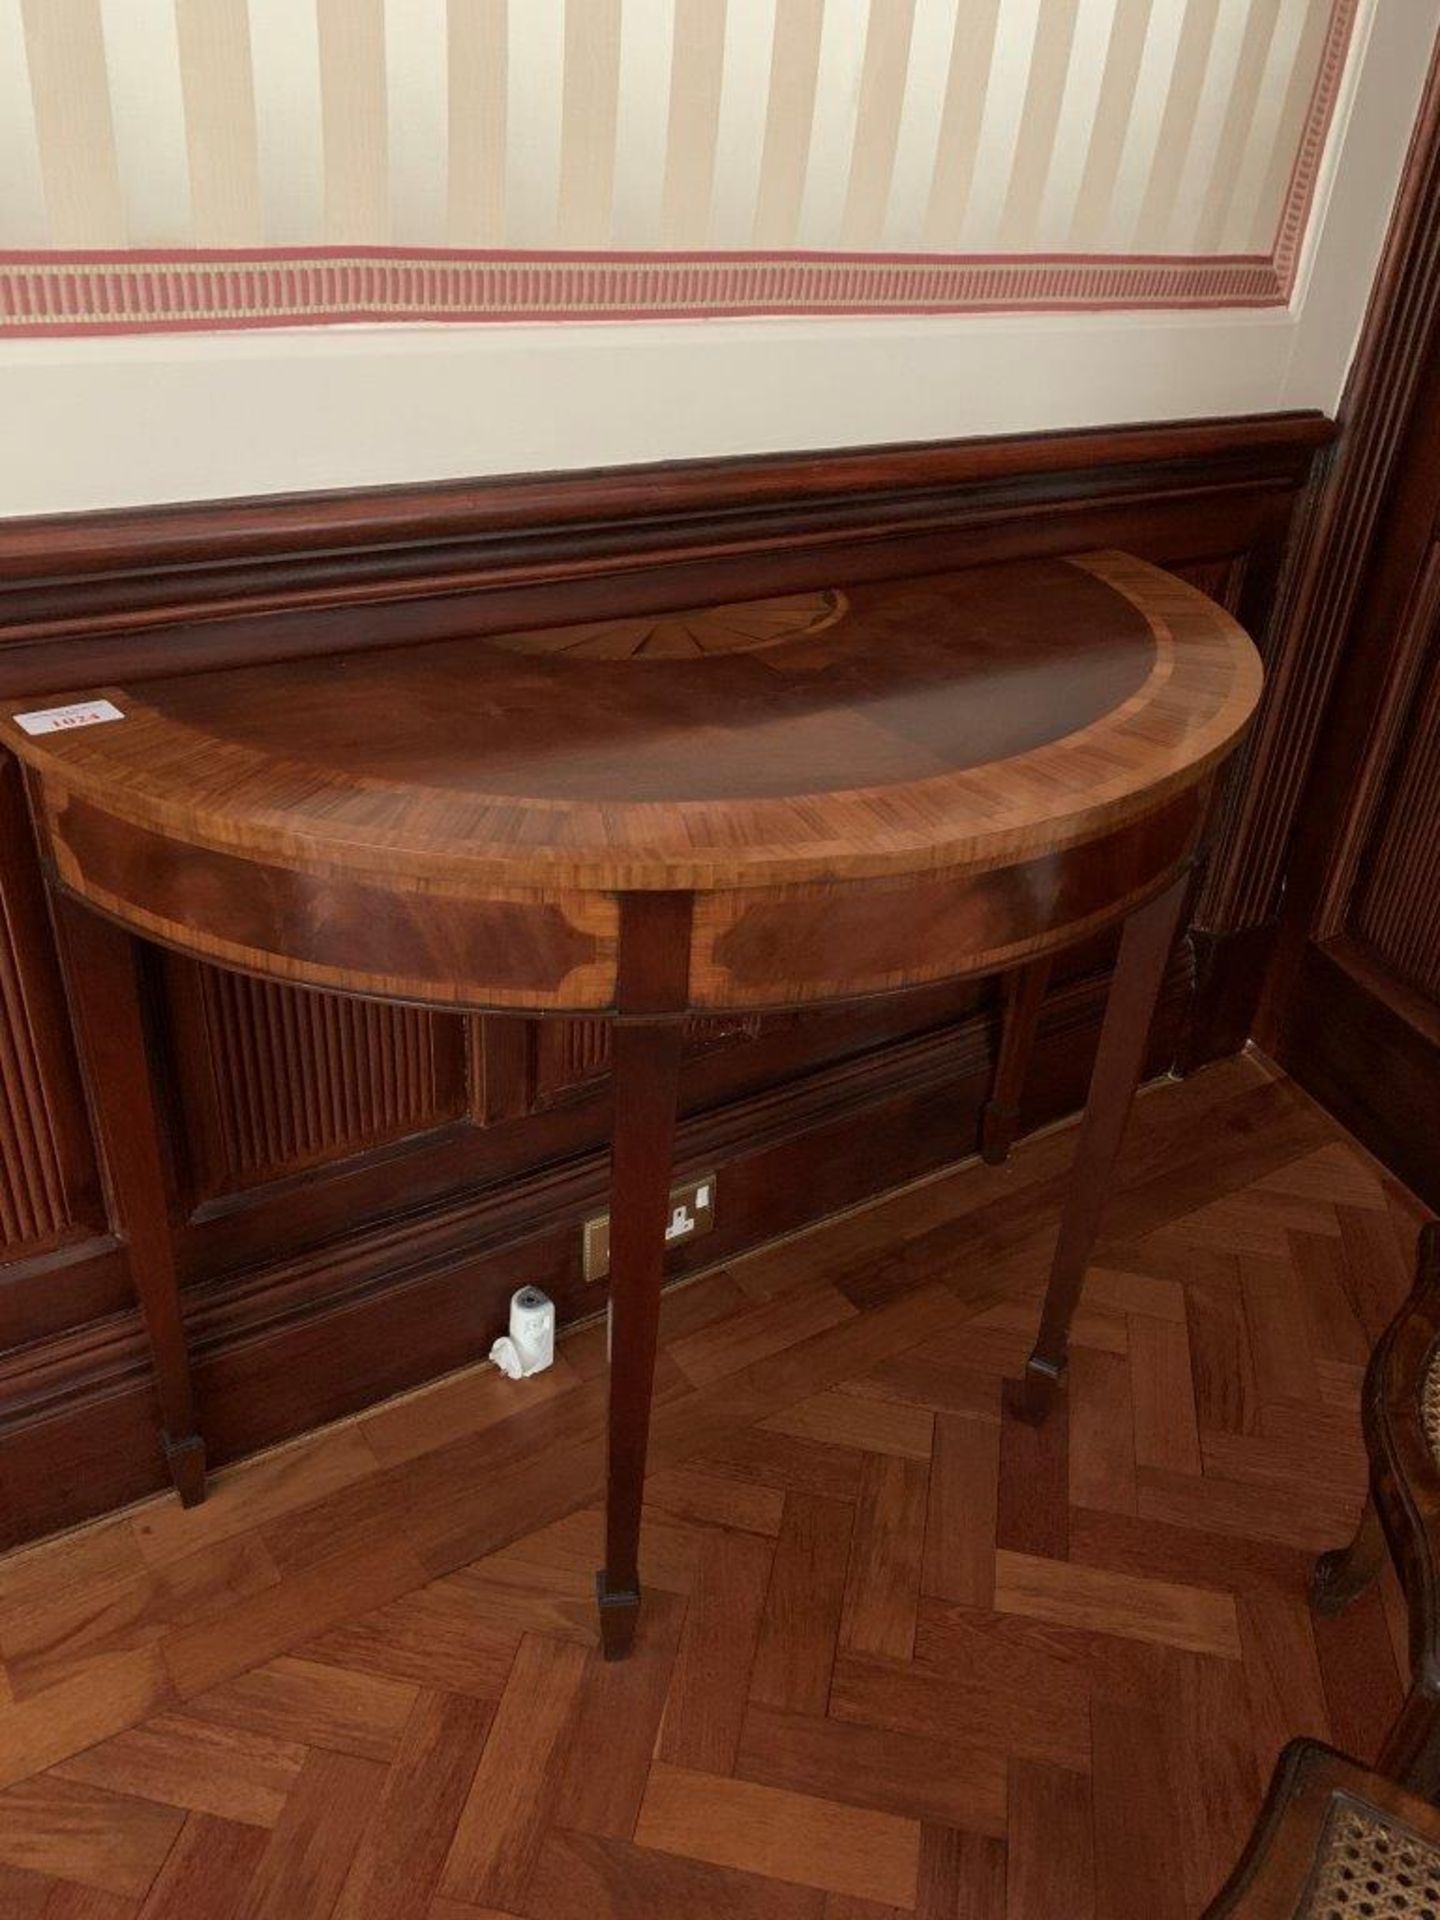 Inlaid Georgian style demi-lune table - Image 2 of 2